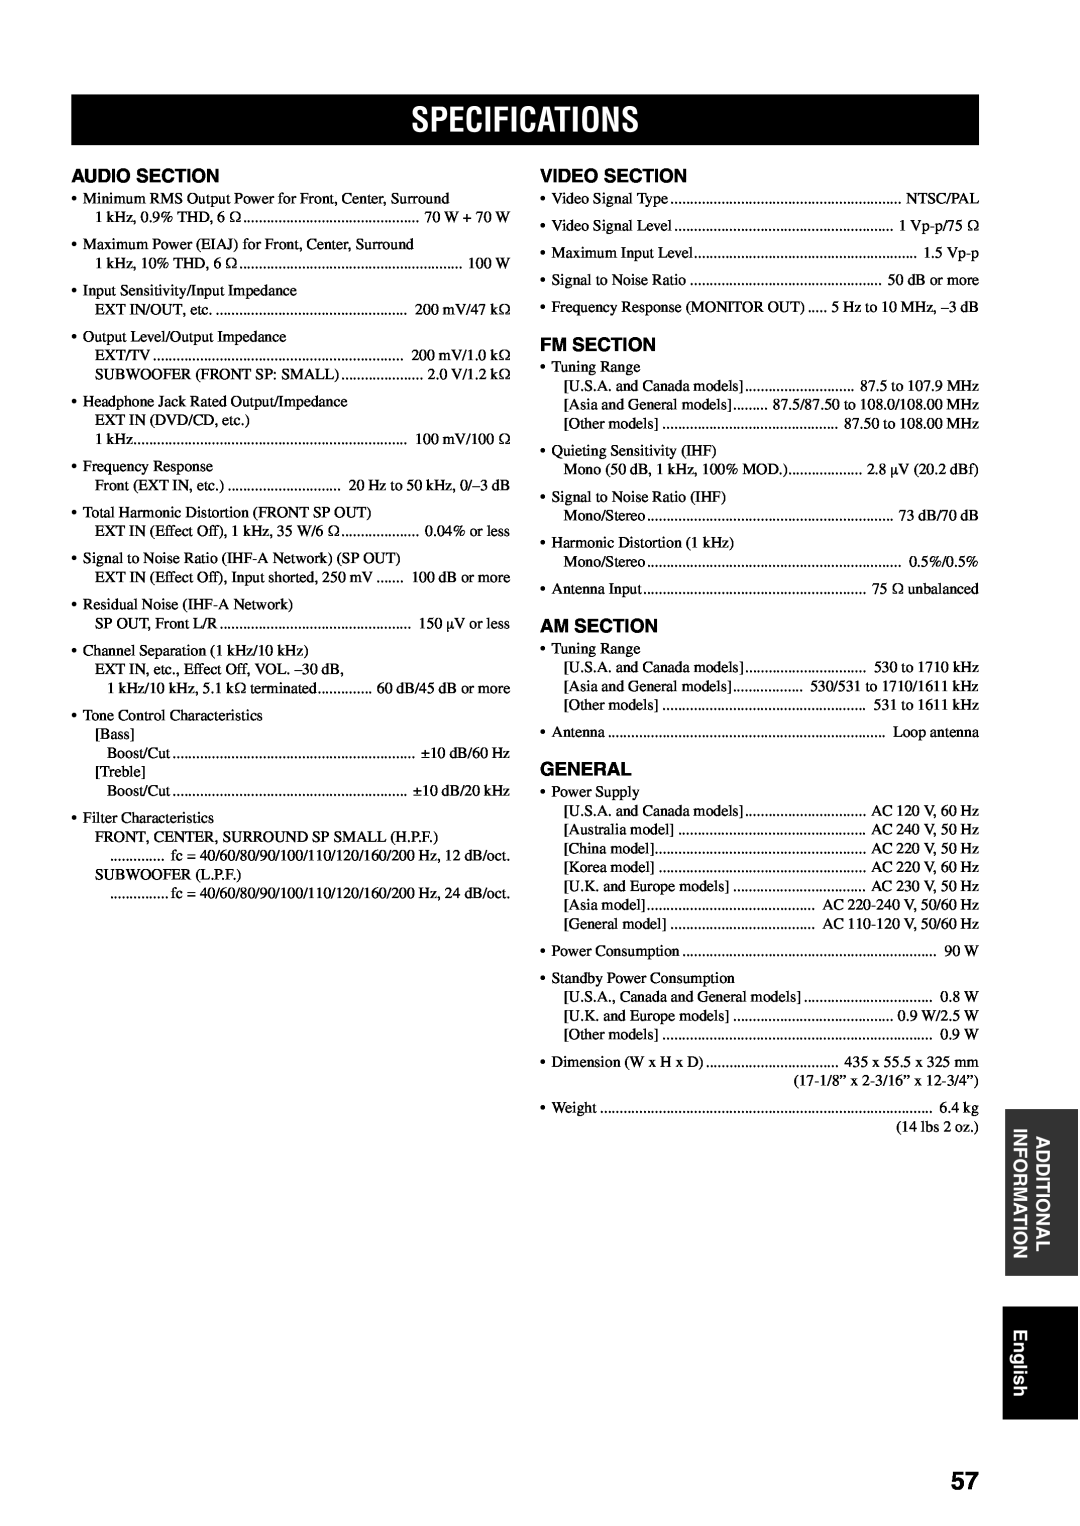 Yamaha RX-SL80 owner manual Specifications, Audio Section, Video Section, Fm Section, Am Section, General 